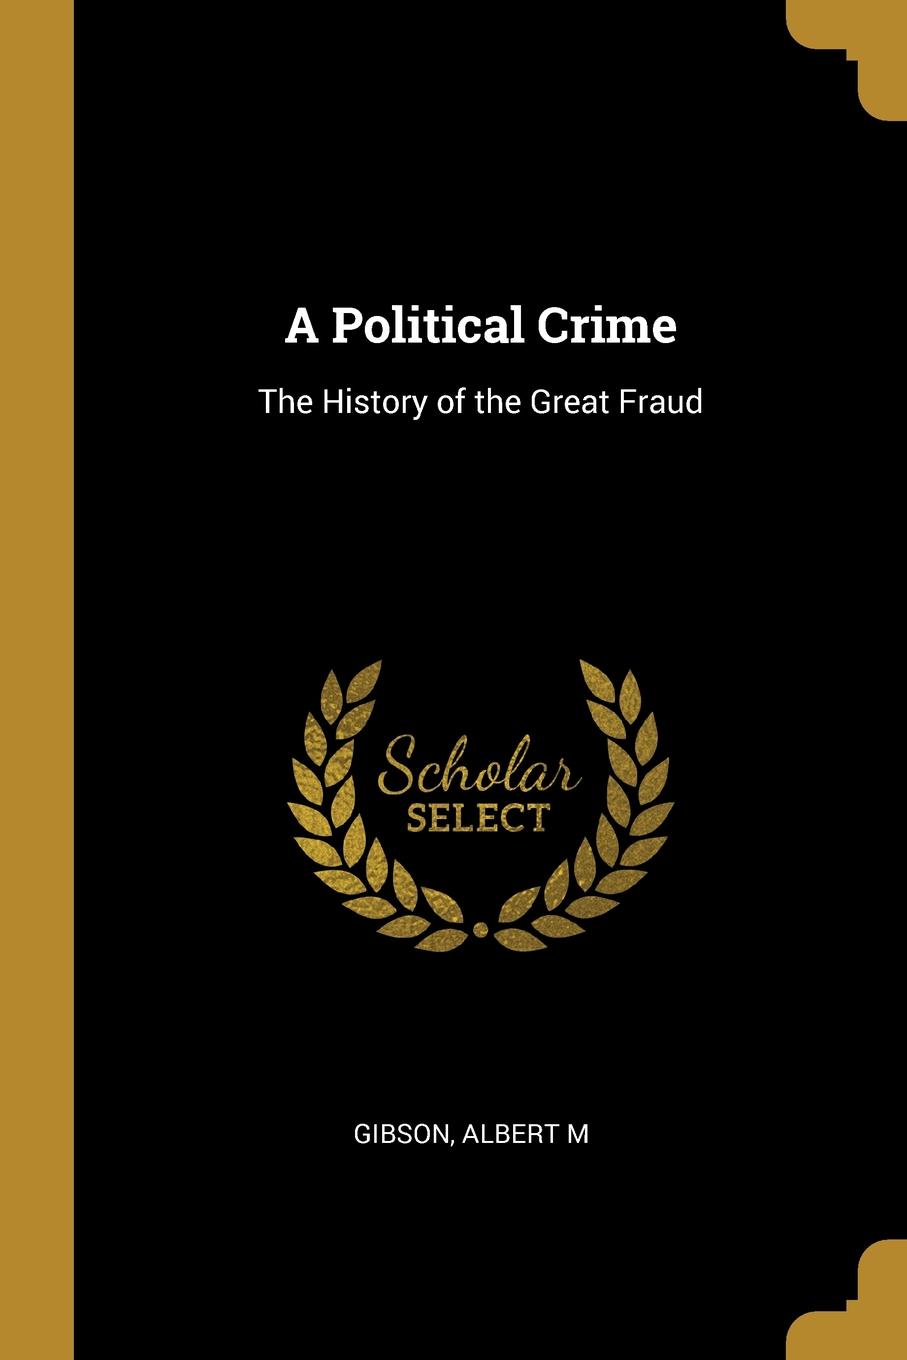 A Political Crime. The History of the Great Fraud